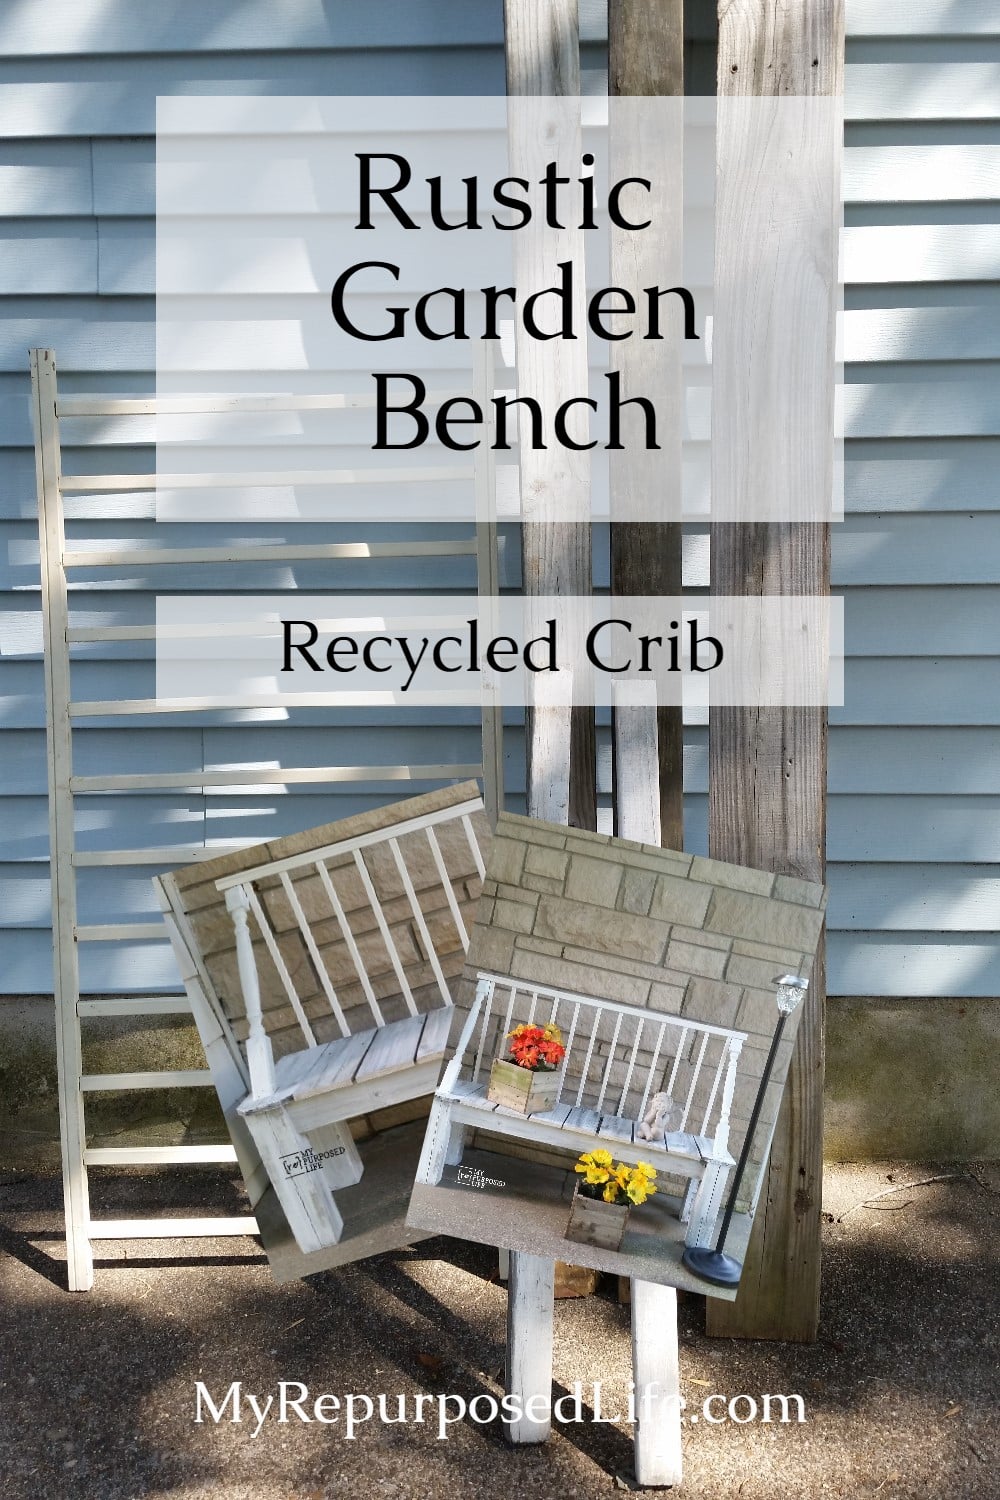 Using reclaimed spindles, crib rails and fence boards--it was easy to make this crib garden bench. Awesome outdoor garden bench costing very little. Complete directions to make your own. #MyRepurposedLife #repurposed #furniture #outdoors #garden #bench via @repurposedlife